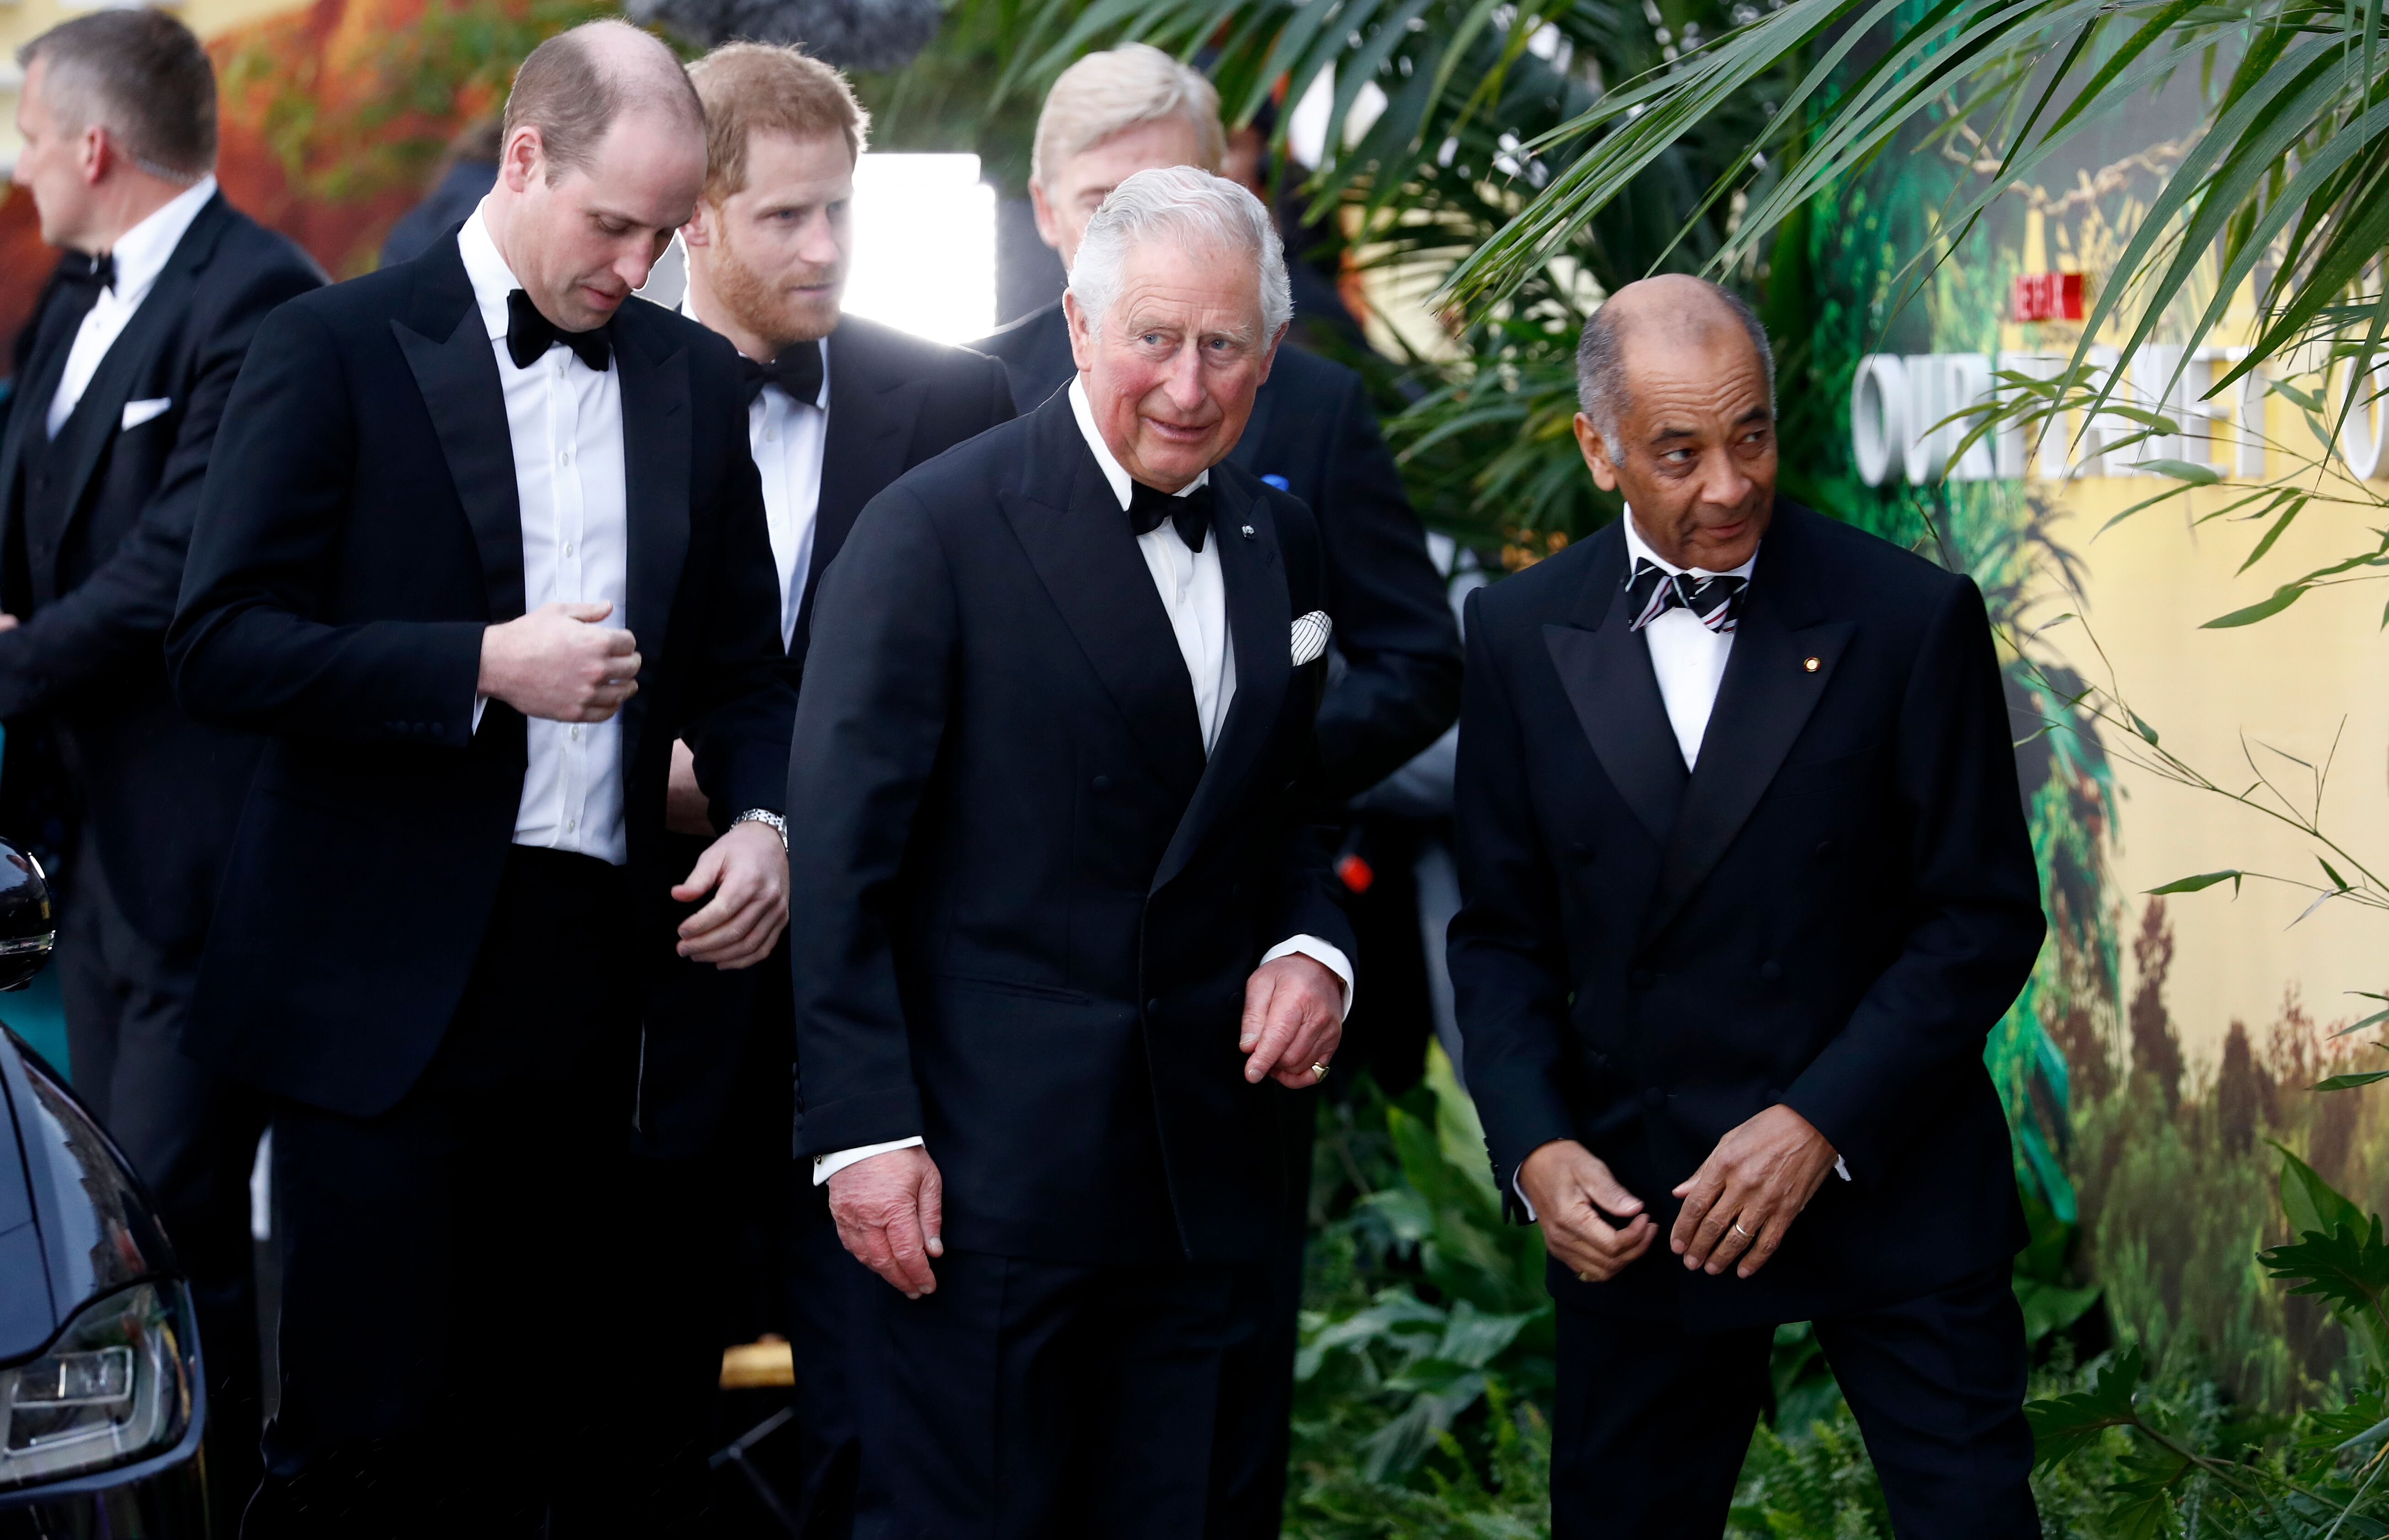 rince Charles, Prince of Wales, Prince William, Duke of Cambridge and Prince Harry, Duke of Sussex attend the "Our Planet" global premiere. | Source: Getty Images